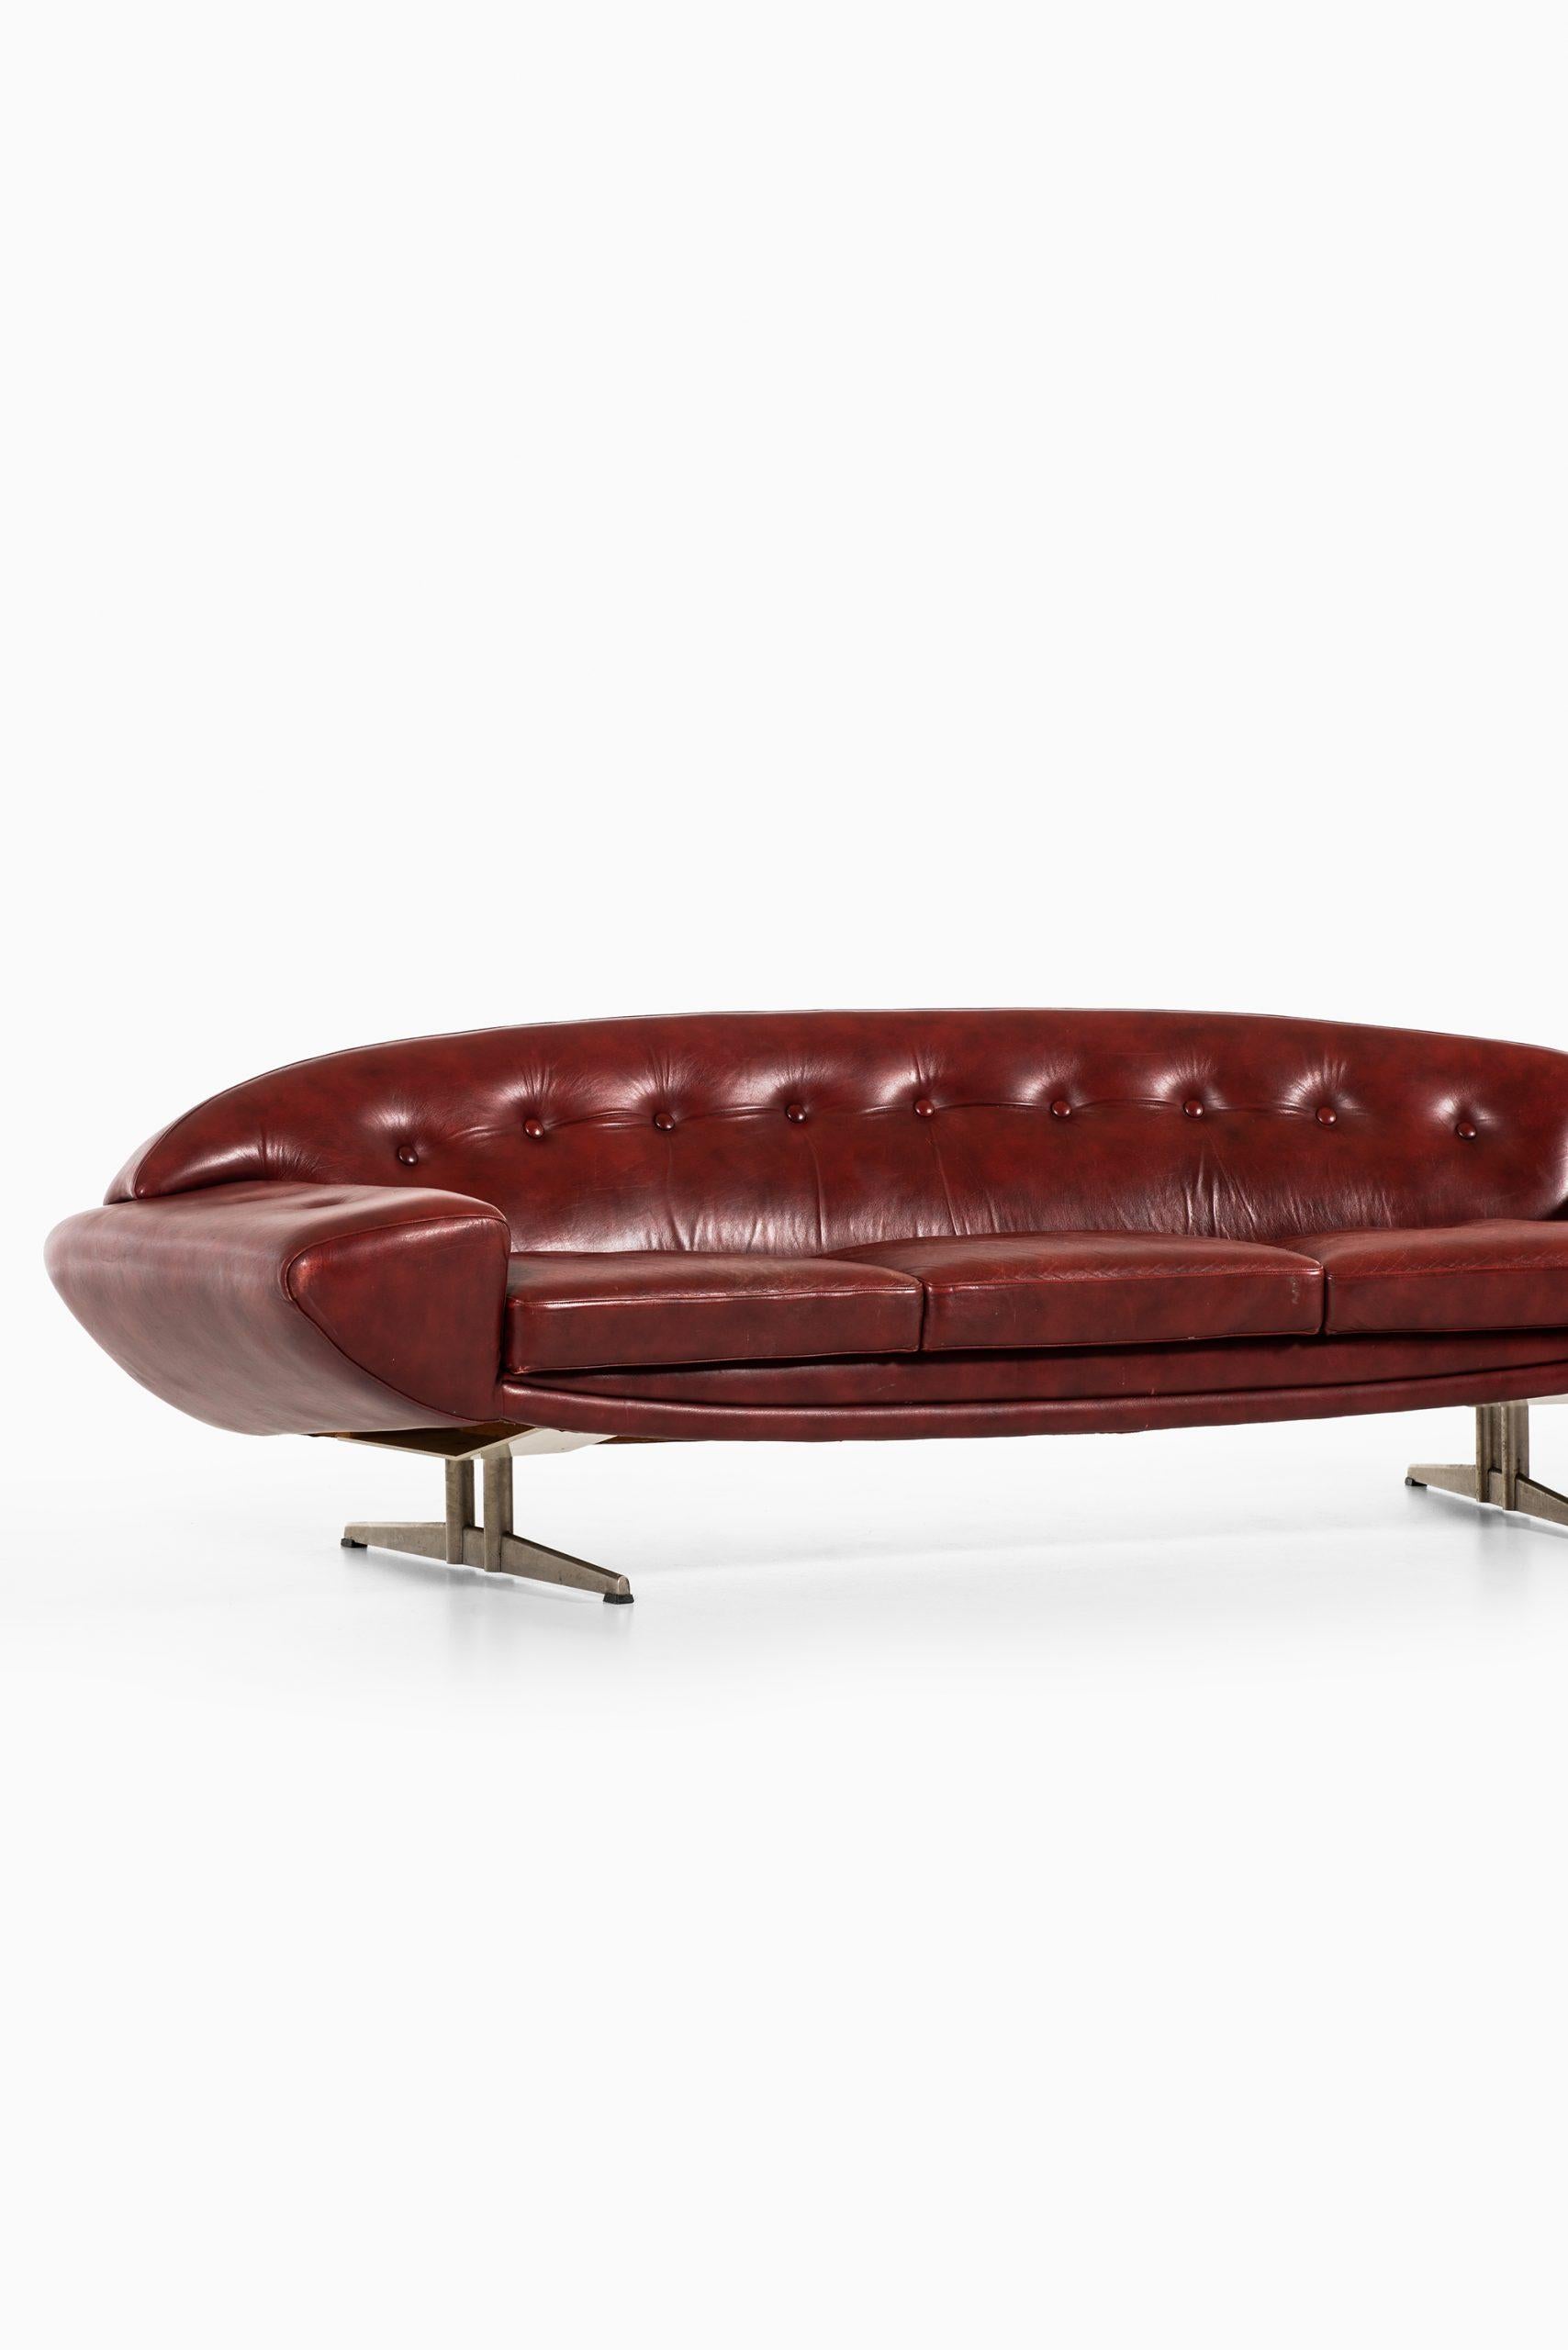 Very rare sofa model Capri designed by Johannes Andersen. Produced by Trensum in Sweden.